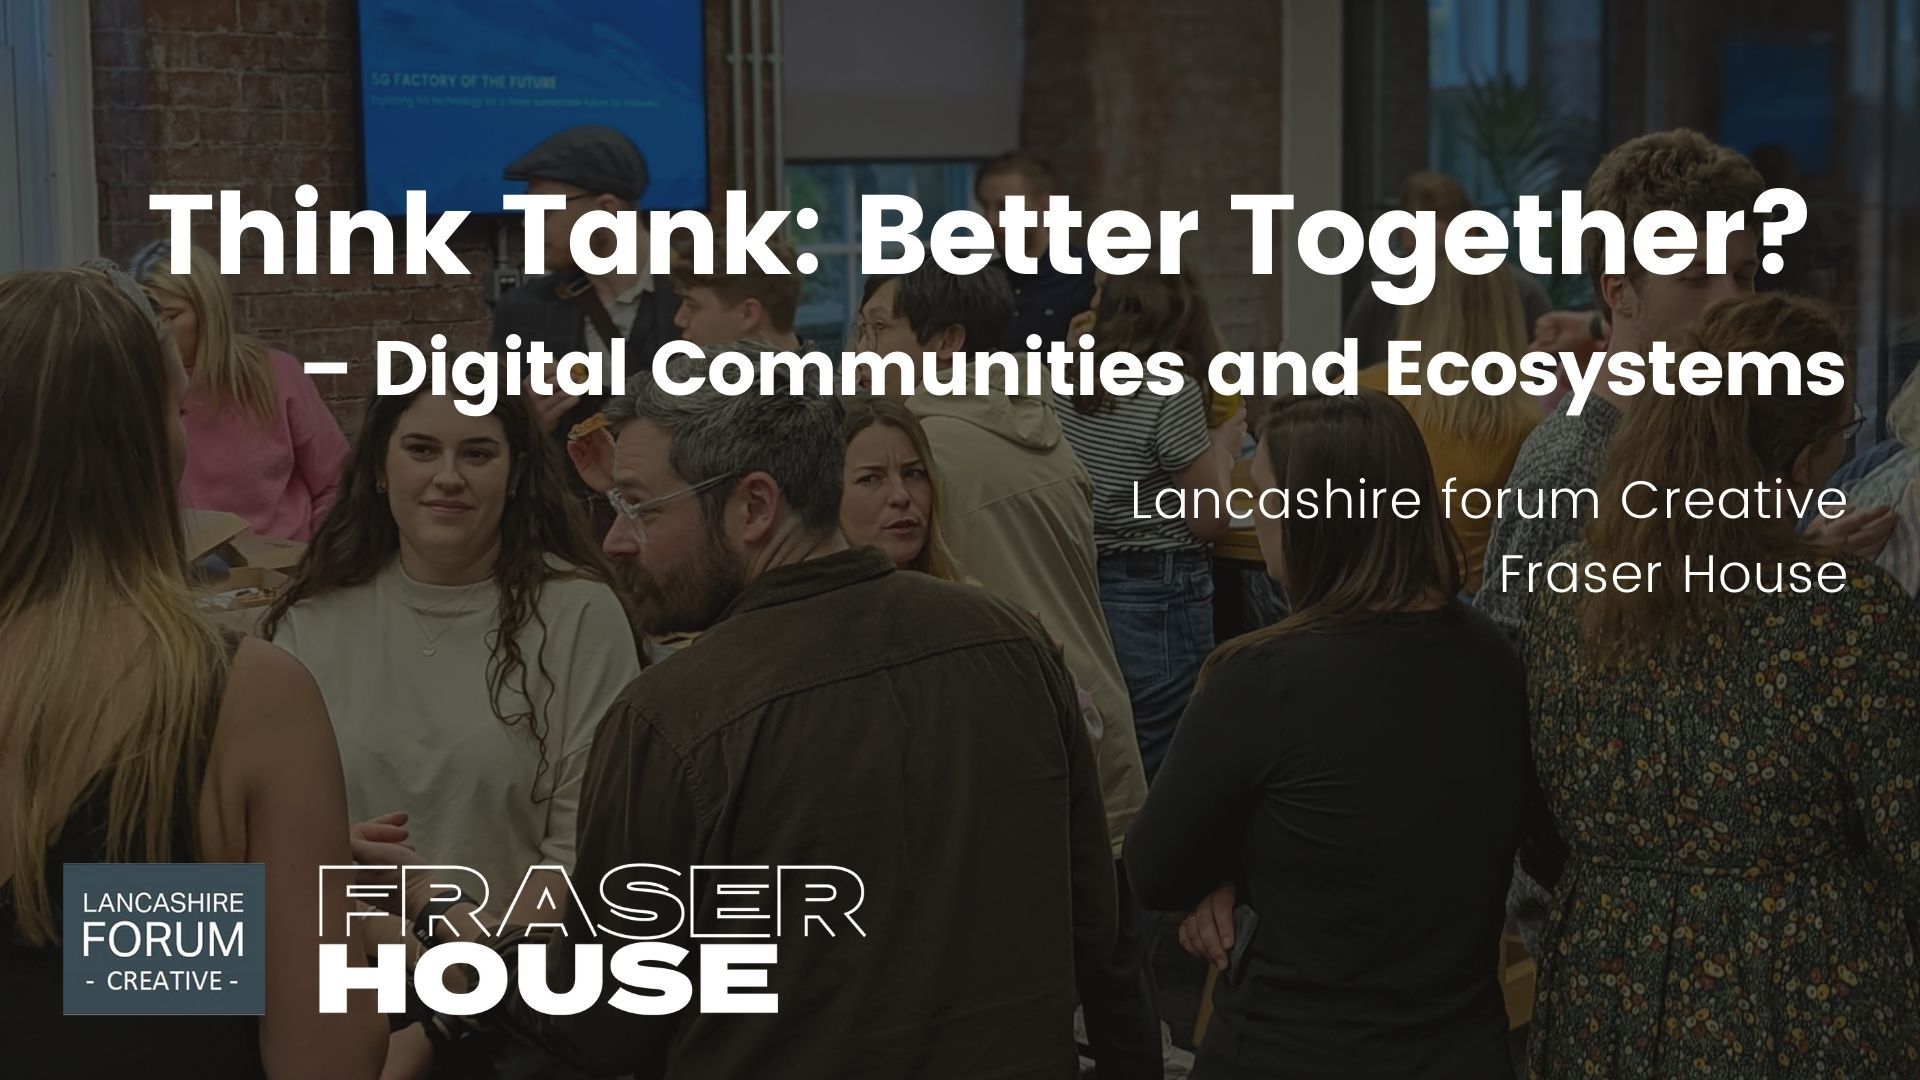 Lancashire Forum Creative X Fraser House:  Think Tank: Better Together? (Digital Communities and Ecosystems)